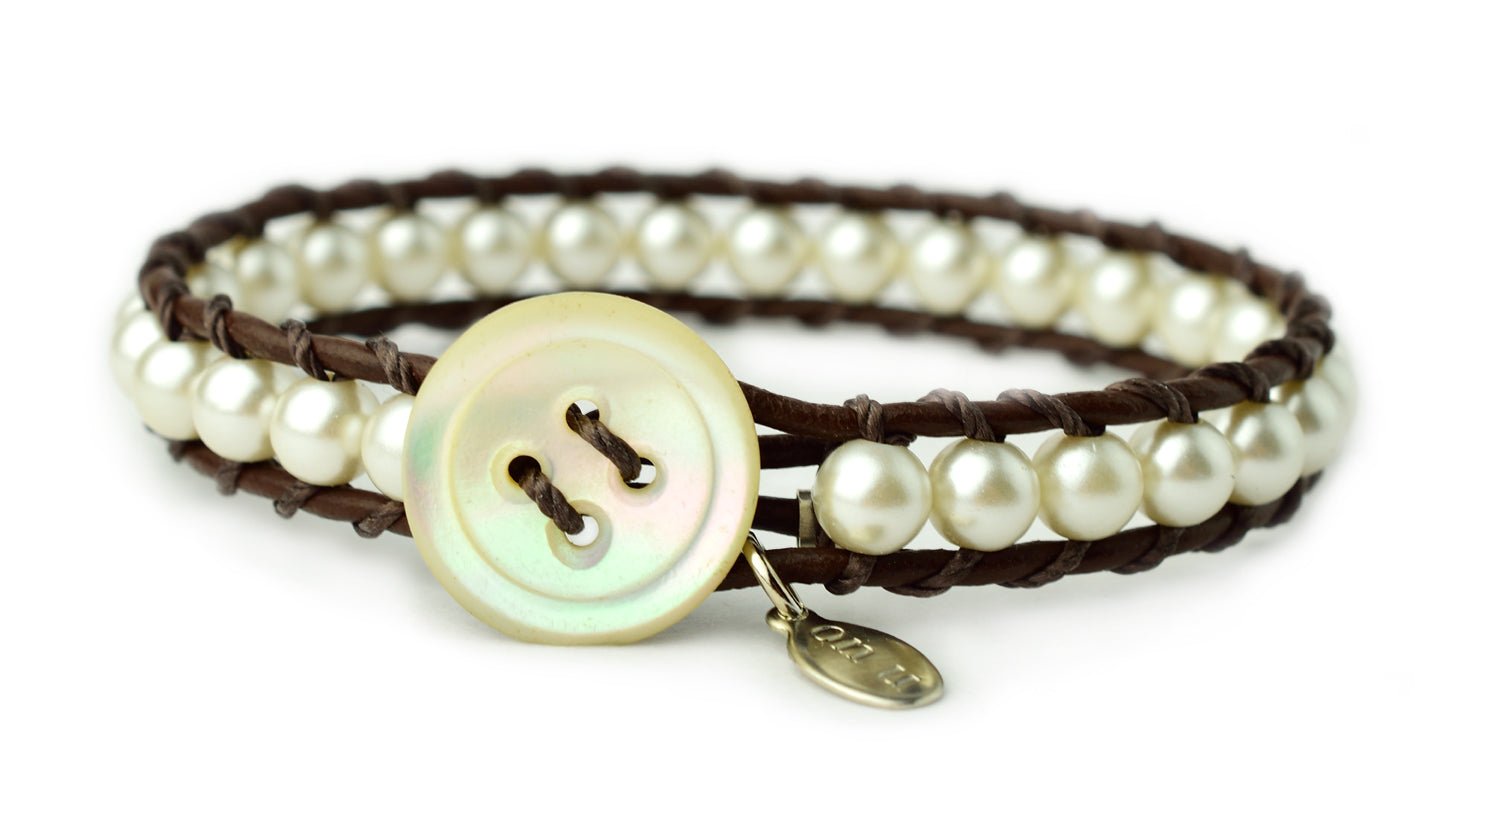 onujewelry.com - Hand-woven Gatsby bracelet created with vintage faux pearls by Donna Silvestri, On U Jewelry, RIchmond, VAy